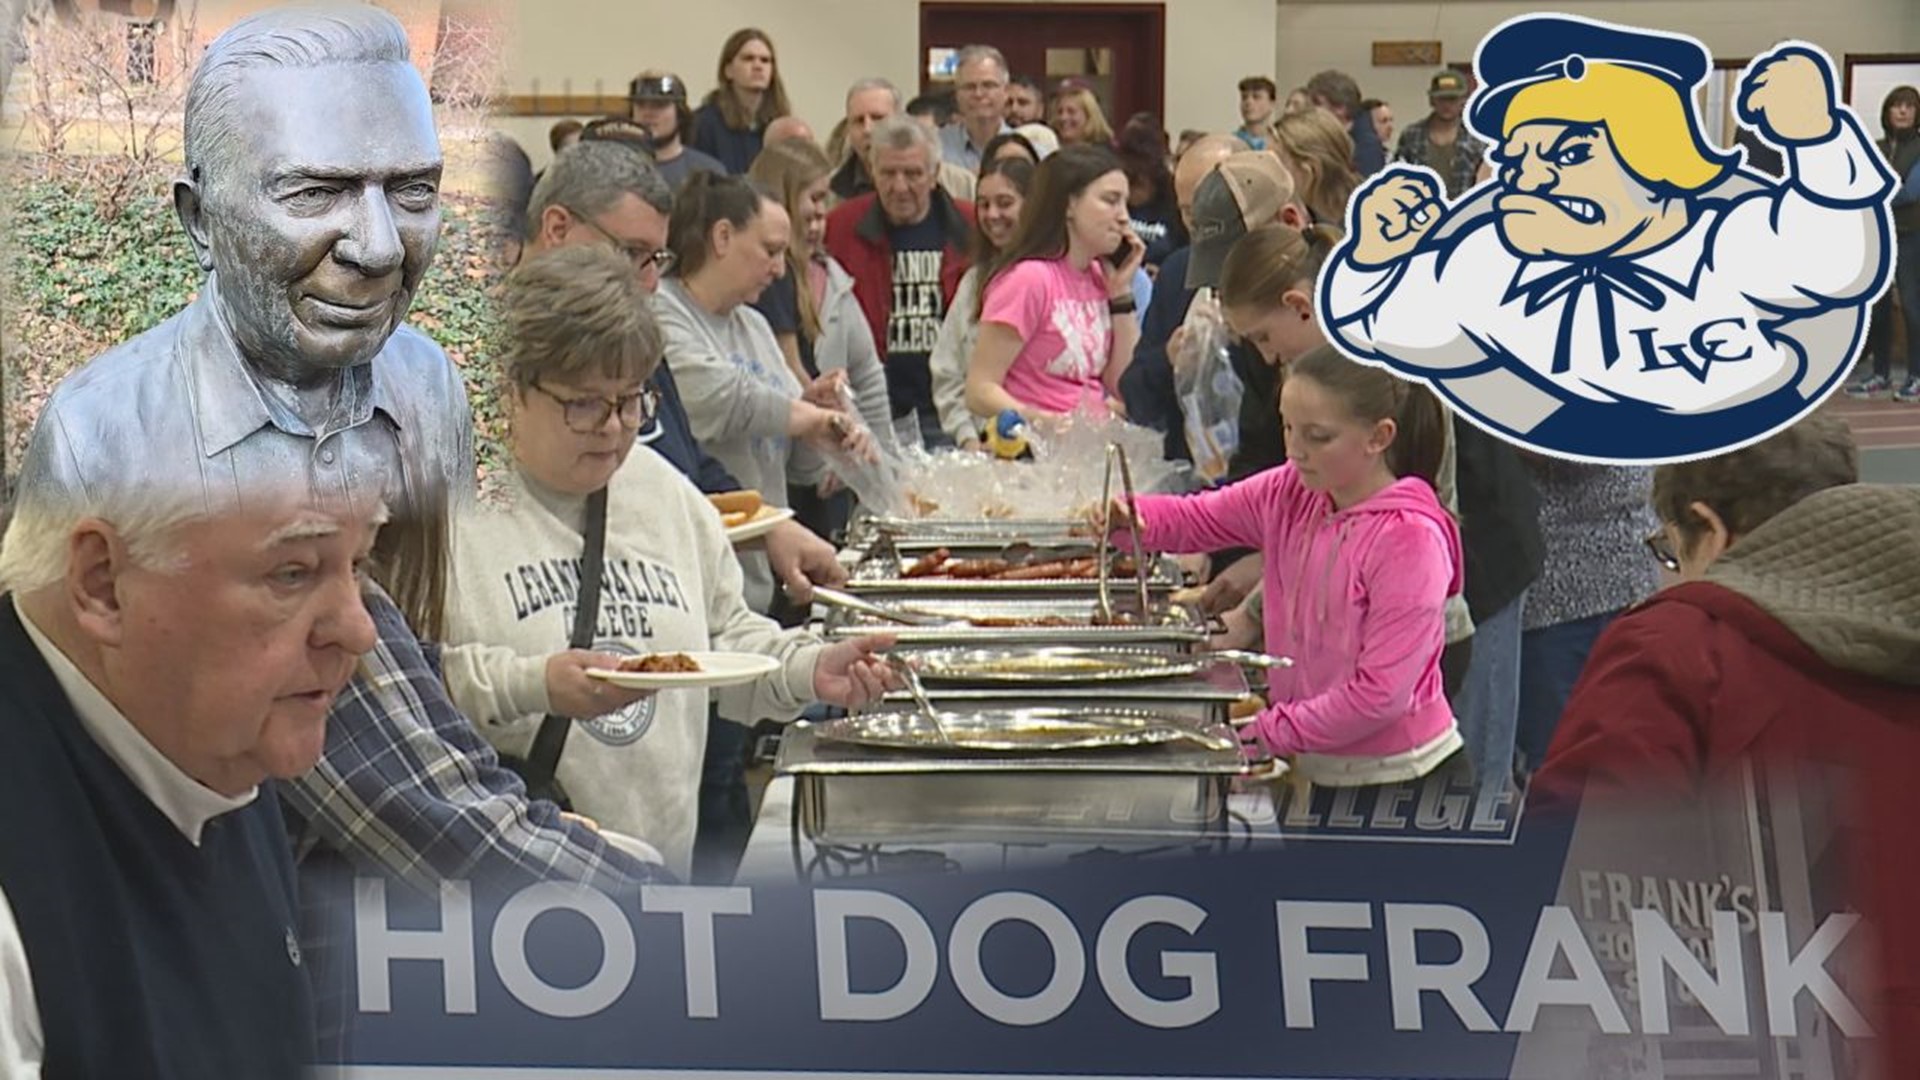 Hundreds of free hot dogs are served up to fans once a year to honor one of LVC's greatest supporters, whose impact is felt almost 30 years after his passing.